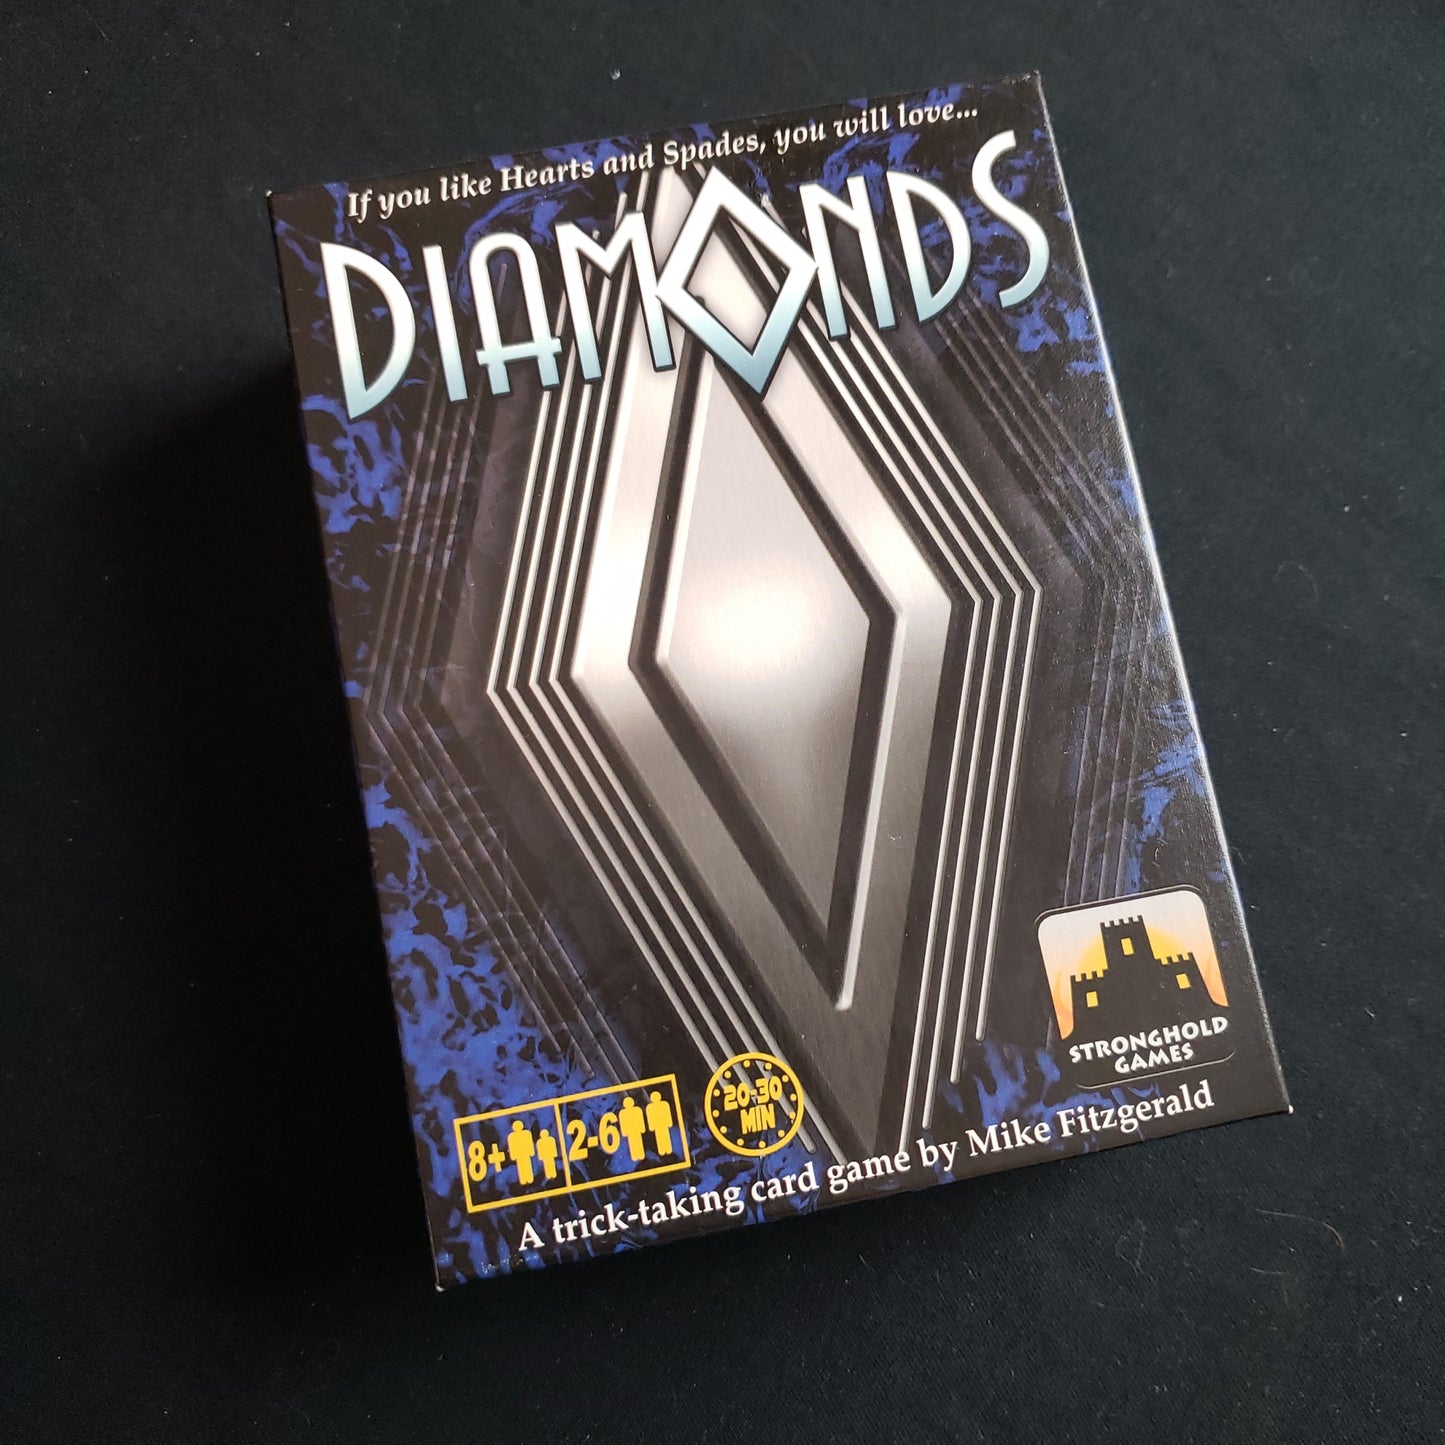 Image shows the front cover of the box of the Diamonds card game